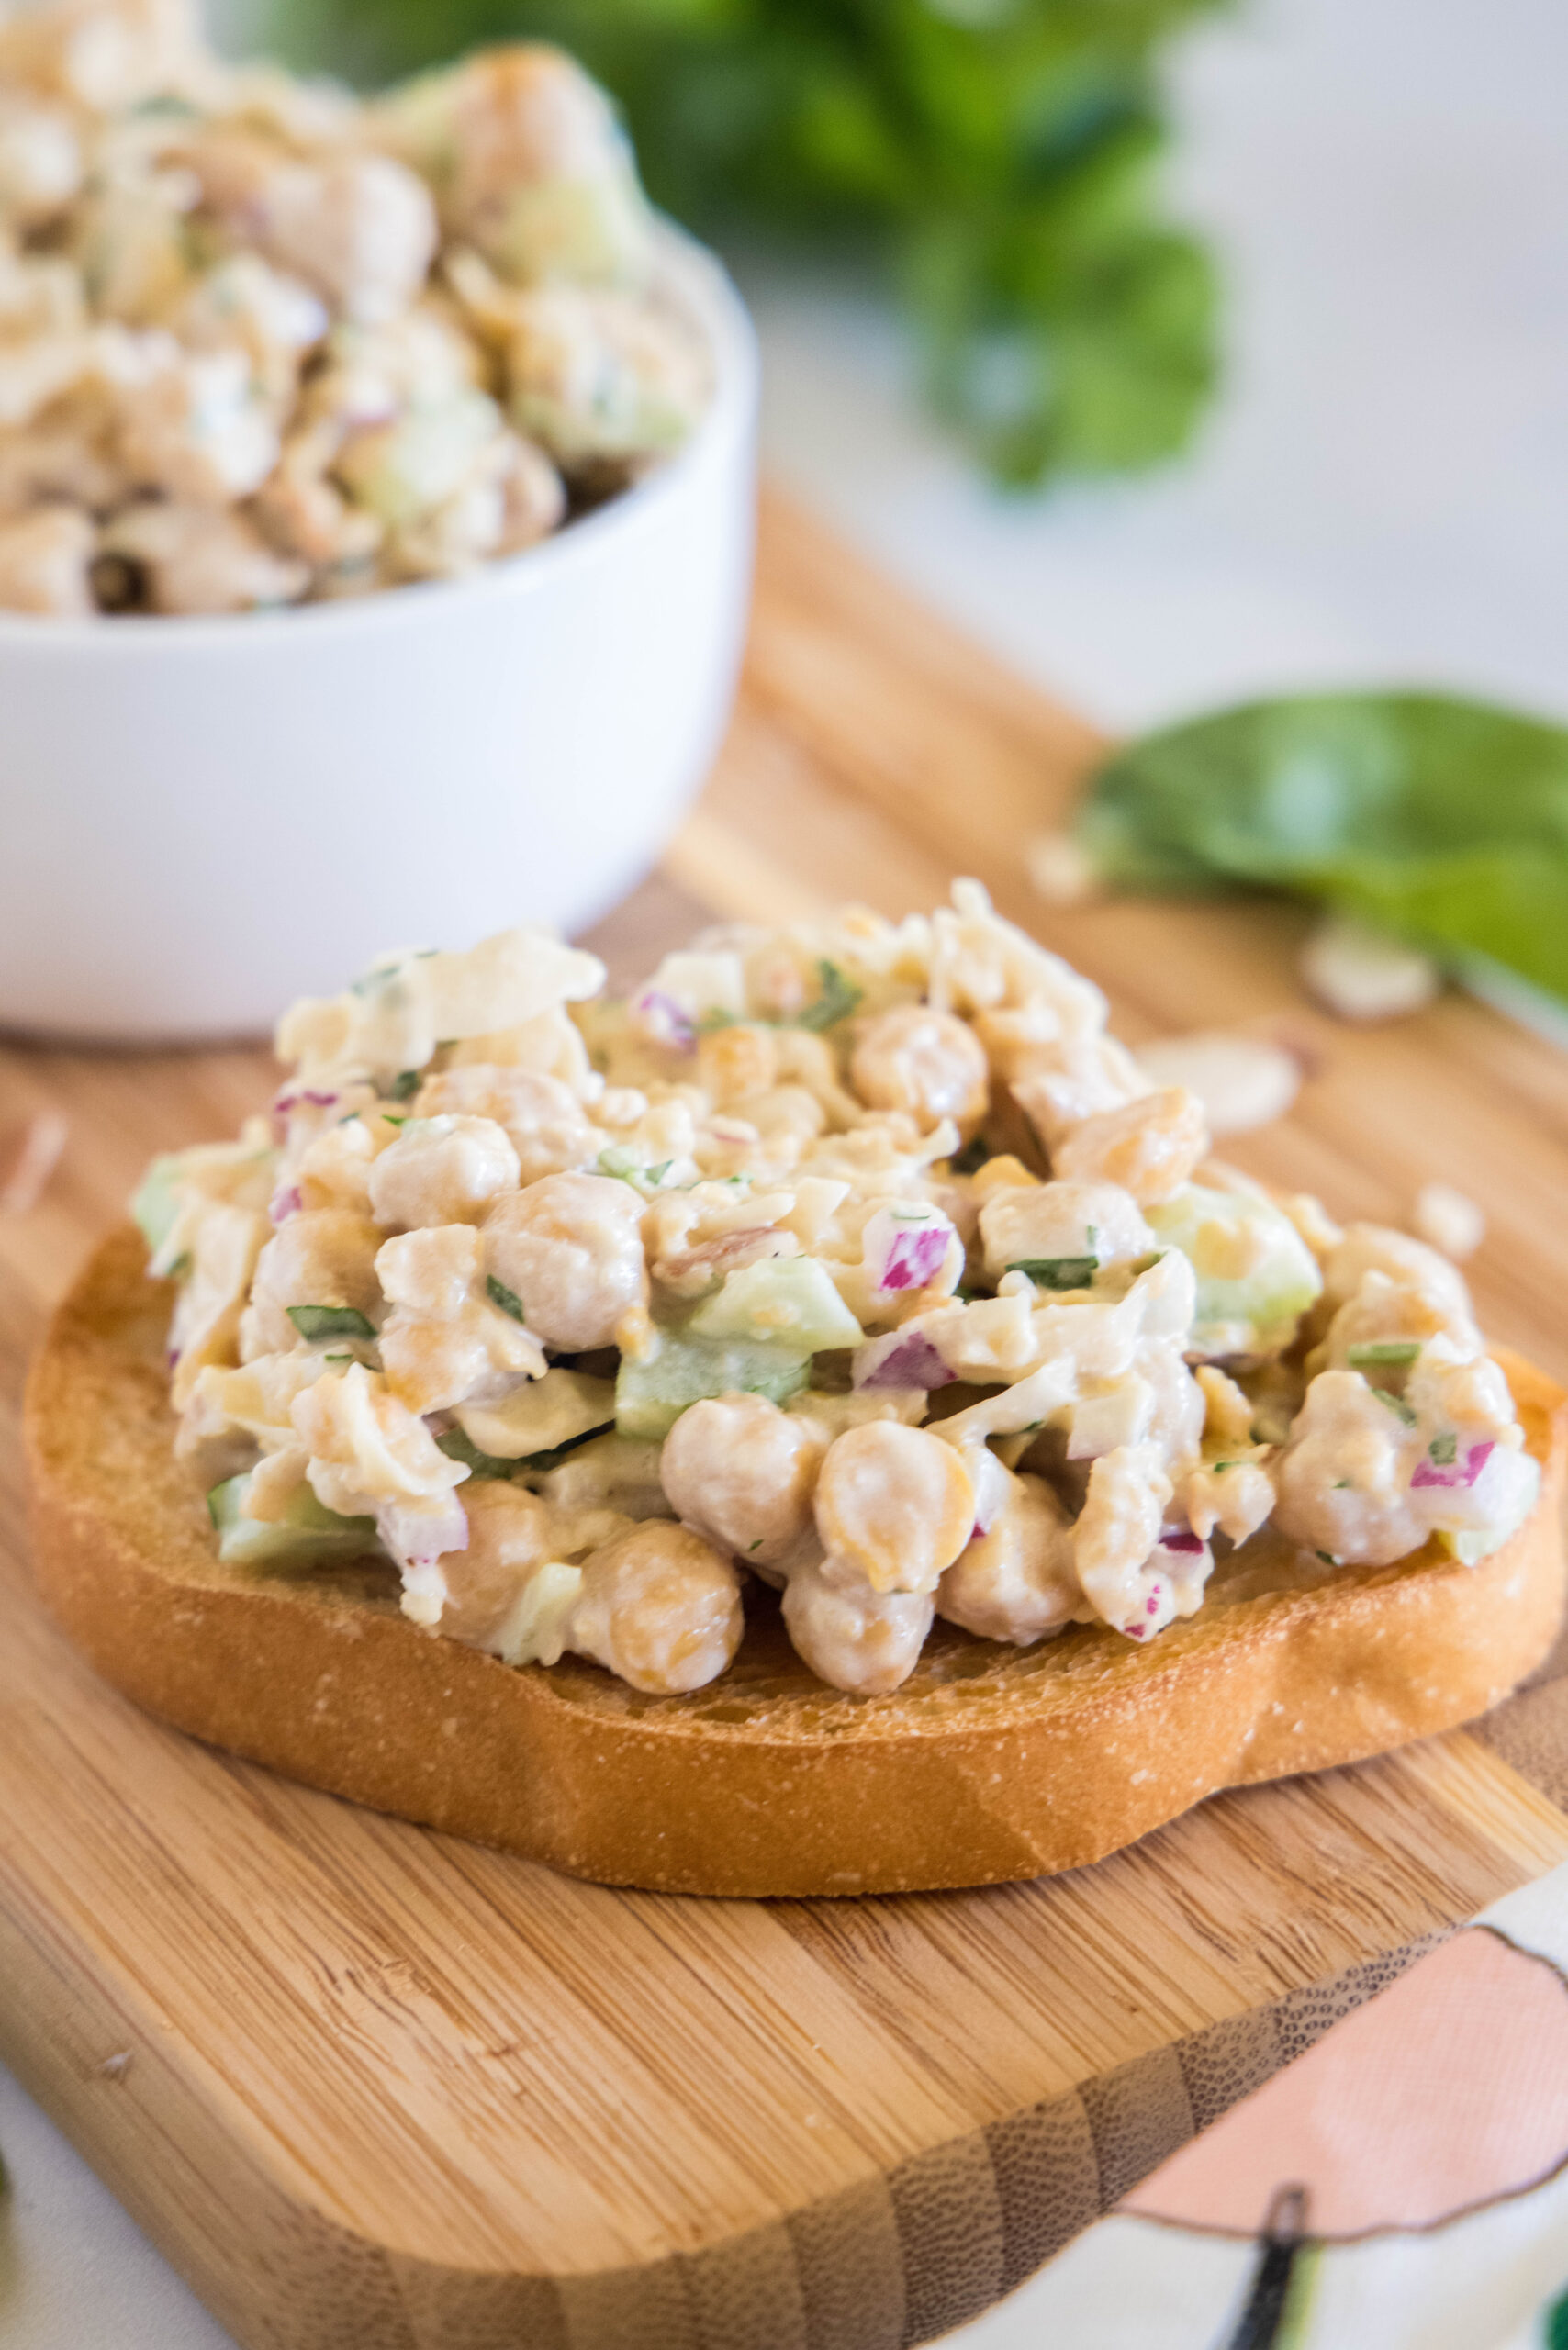 Chickpea chicken salad served on a slice of bread on a wooden cutting board, with a bowl of chickpea salad in the background.